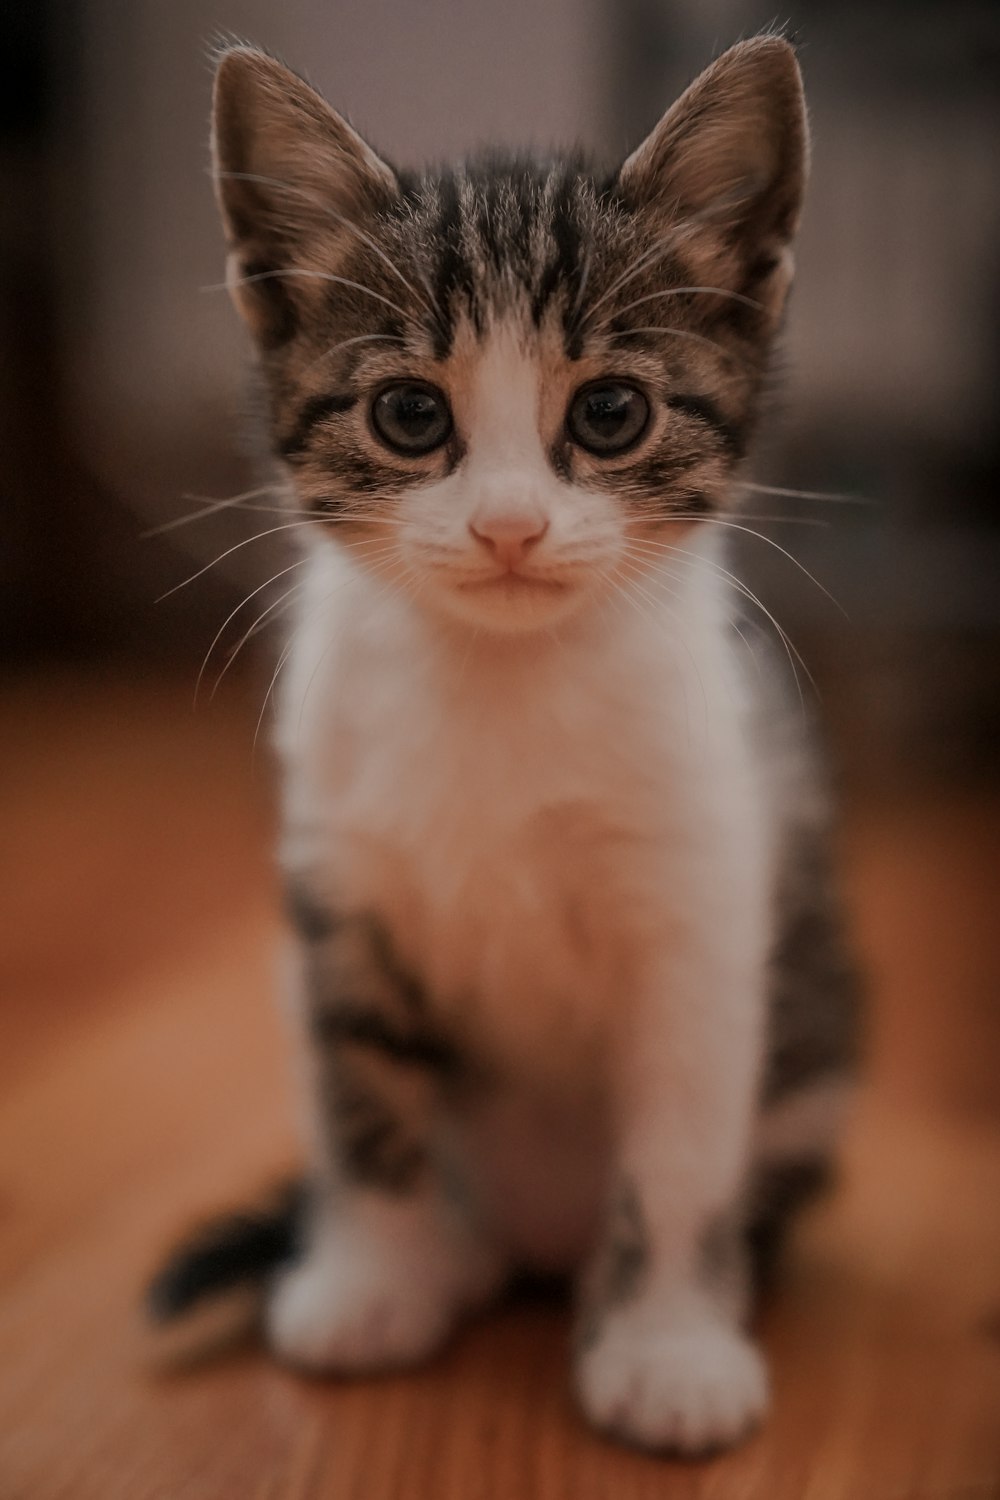 1500+ Baby Cat Pictures | Download Free Images on Unsplash